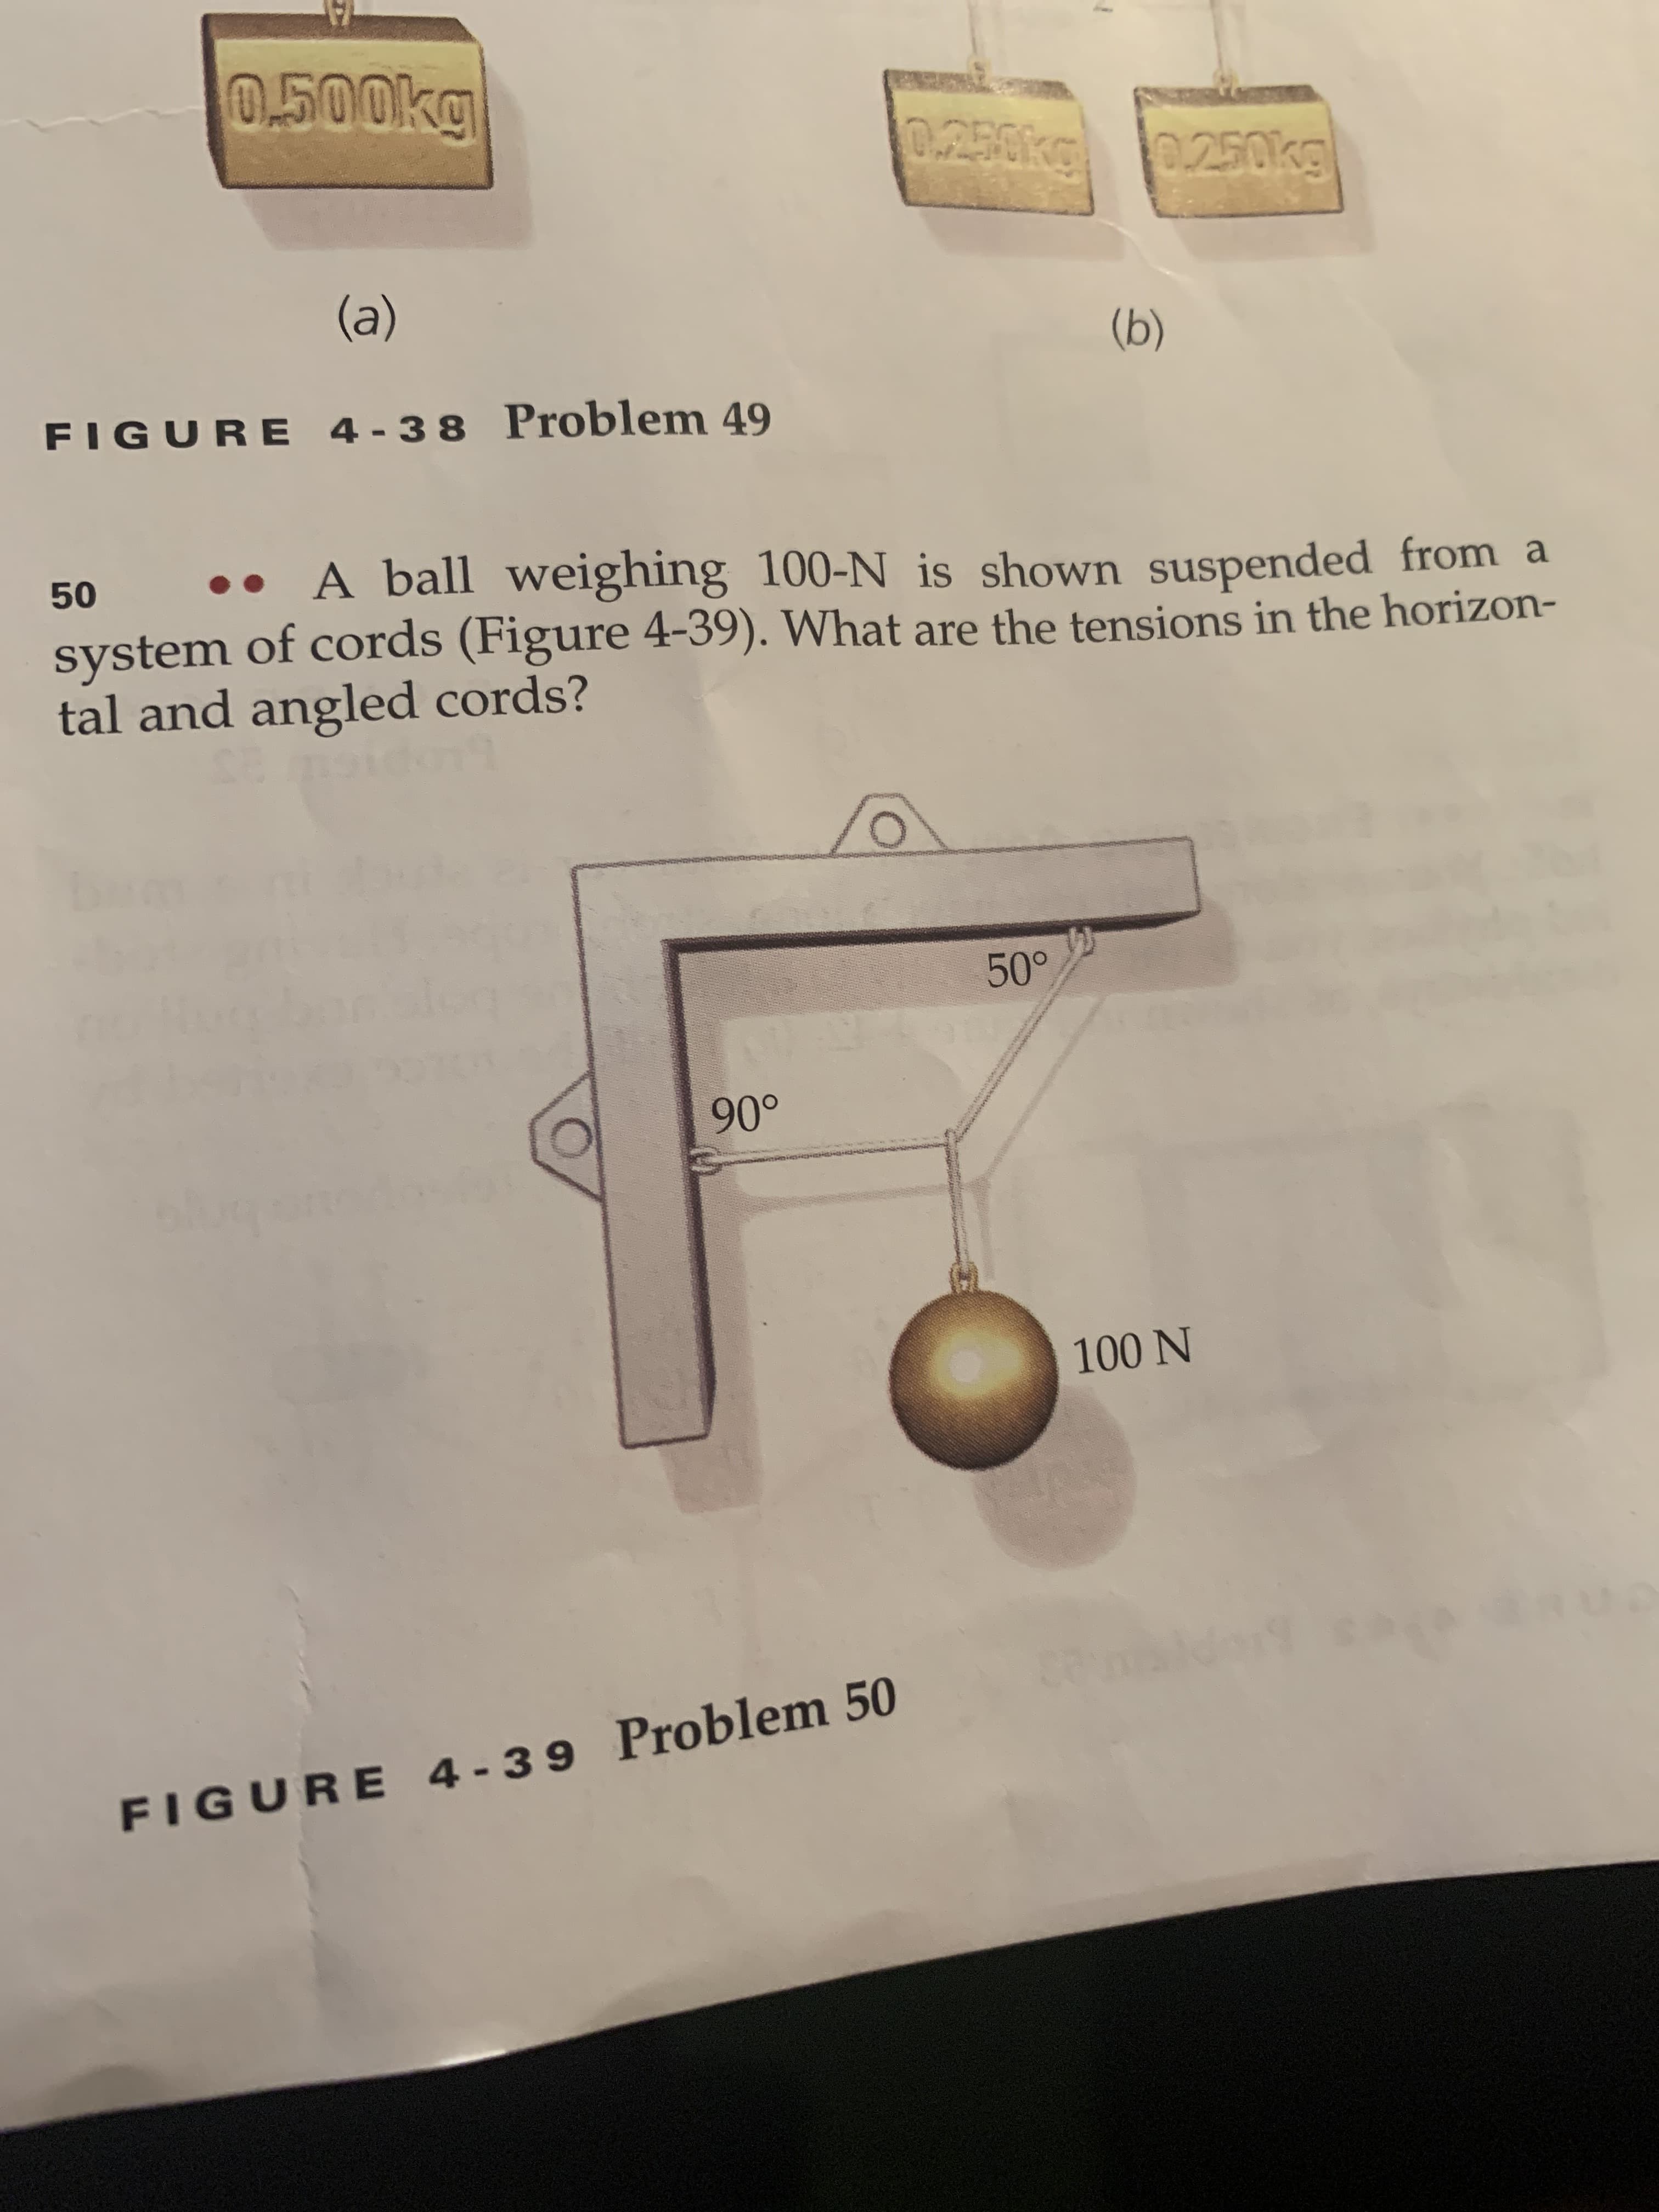 0.500kg
0.250kg
0.250kg
(a)
(b)
FIGURE 4-38 Problem 49
50
A ball weighing 100-N is shown suspended from a
system of cords (Figure 4-39). What are the tensions in the horizon-
tal and angled cords?
50°
90°
100 N
FIGURE 4-39 Problem 50
